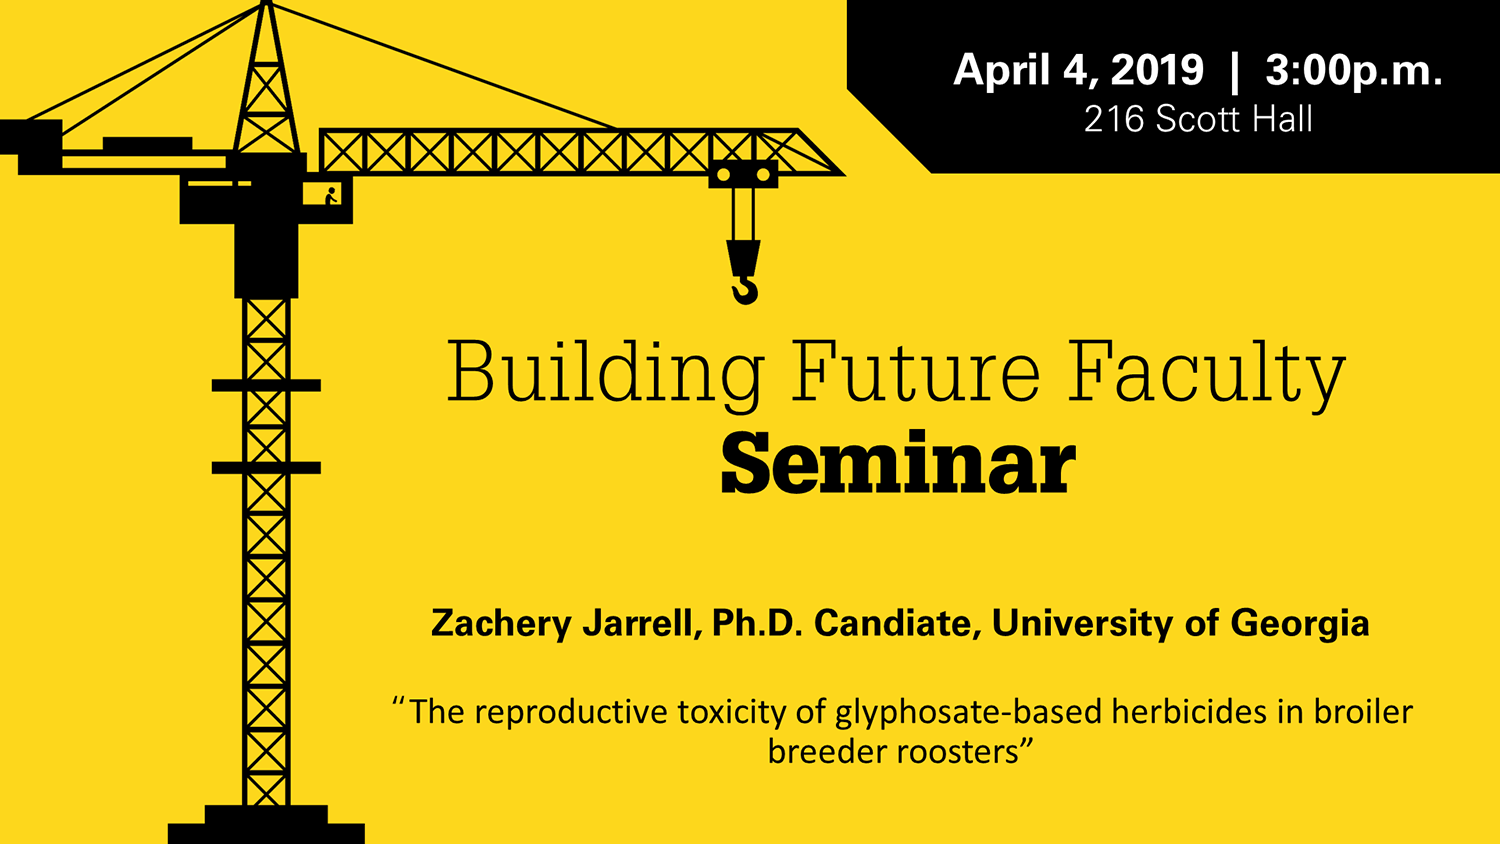 Yellow and black slide, with crane icon, announcing Zachery Jarrell's seminar